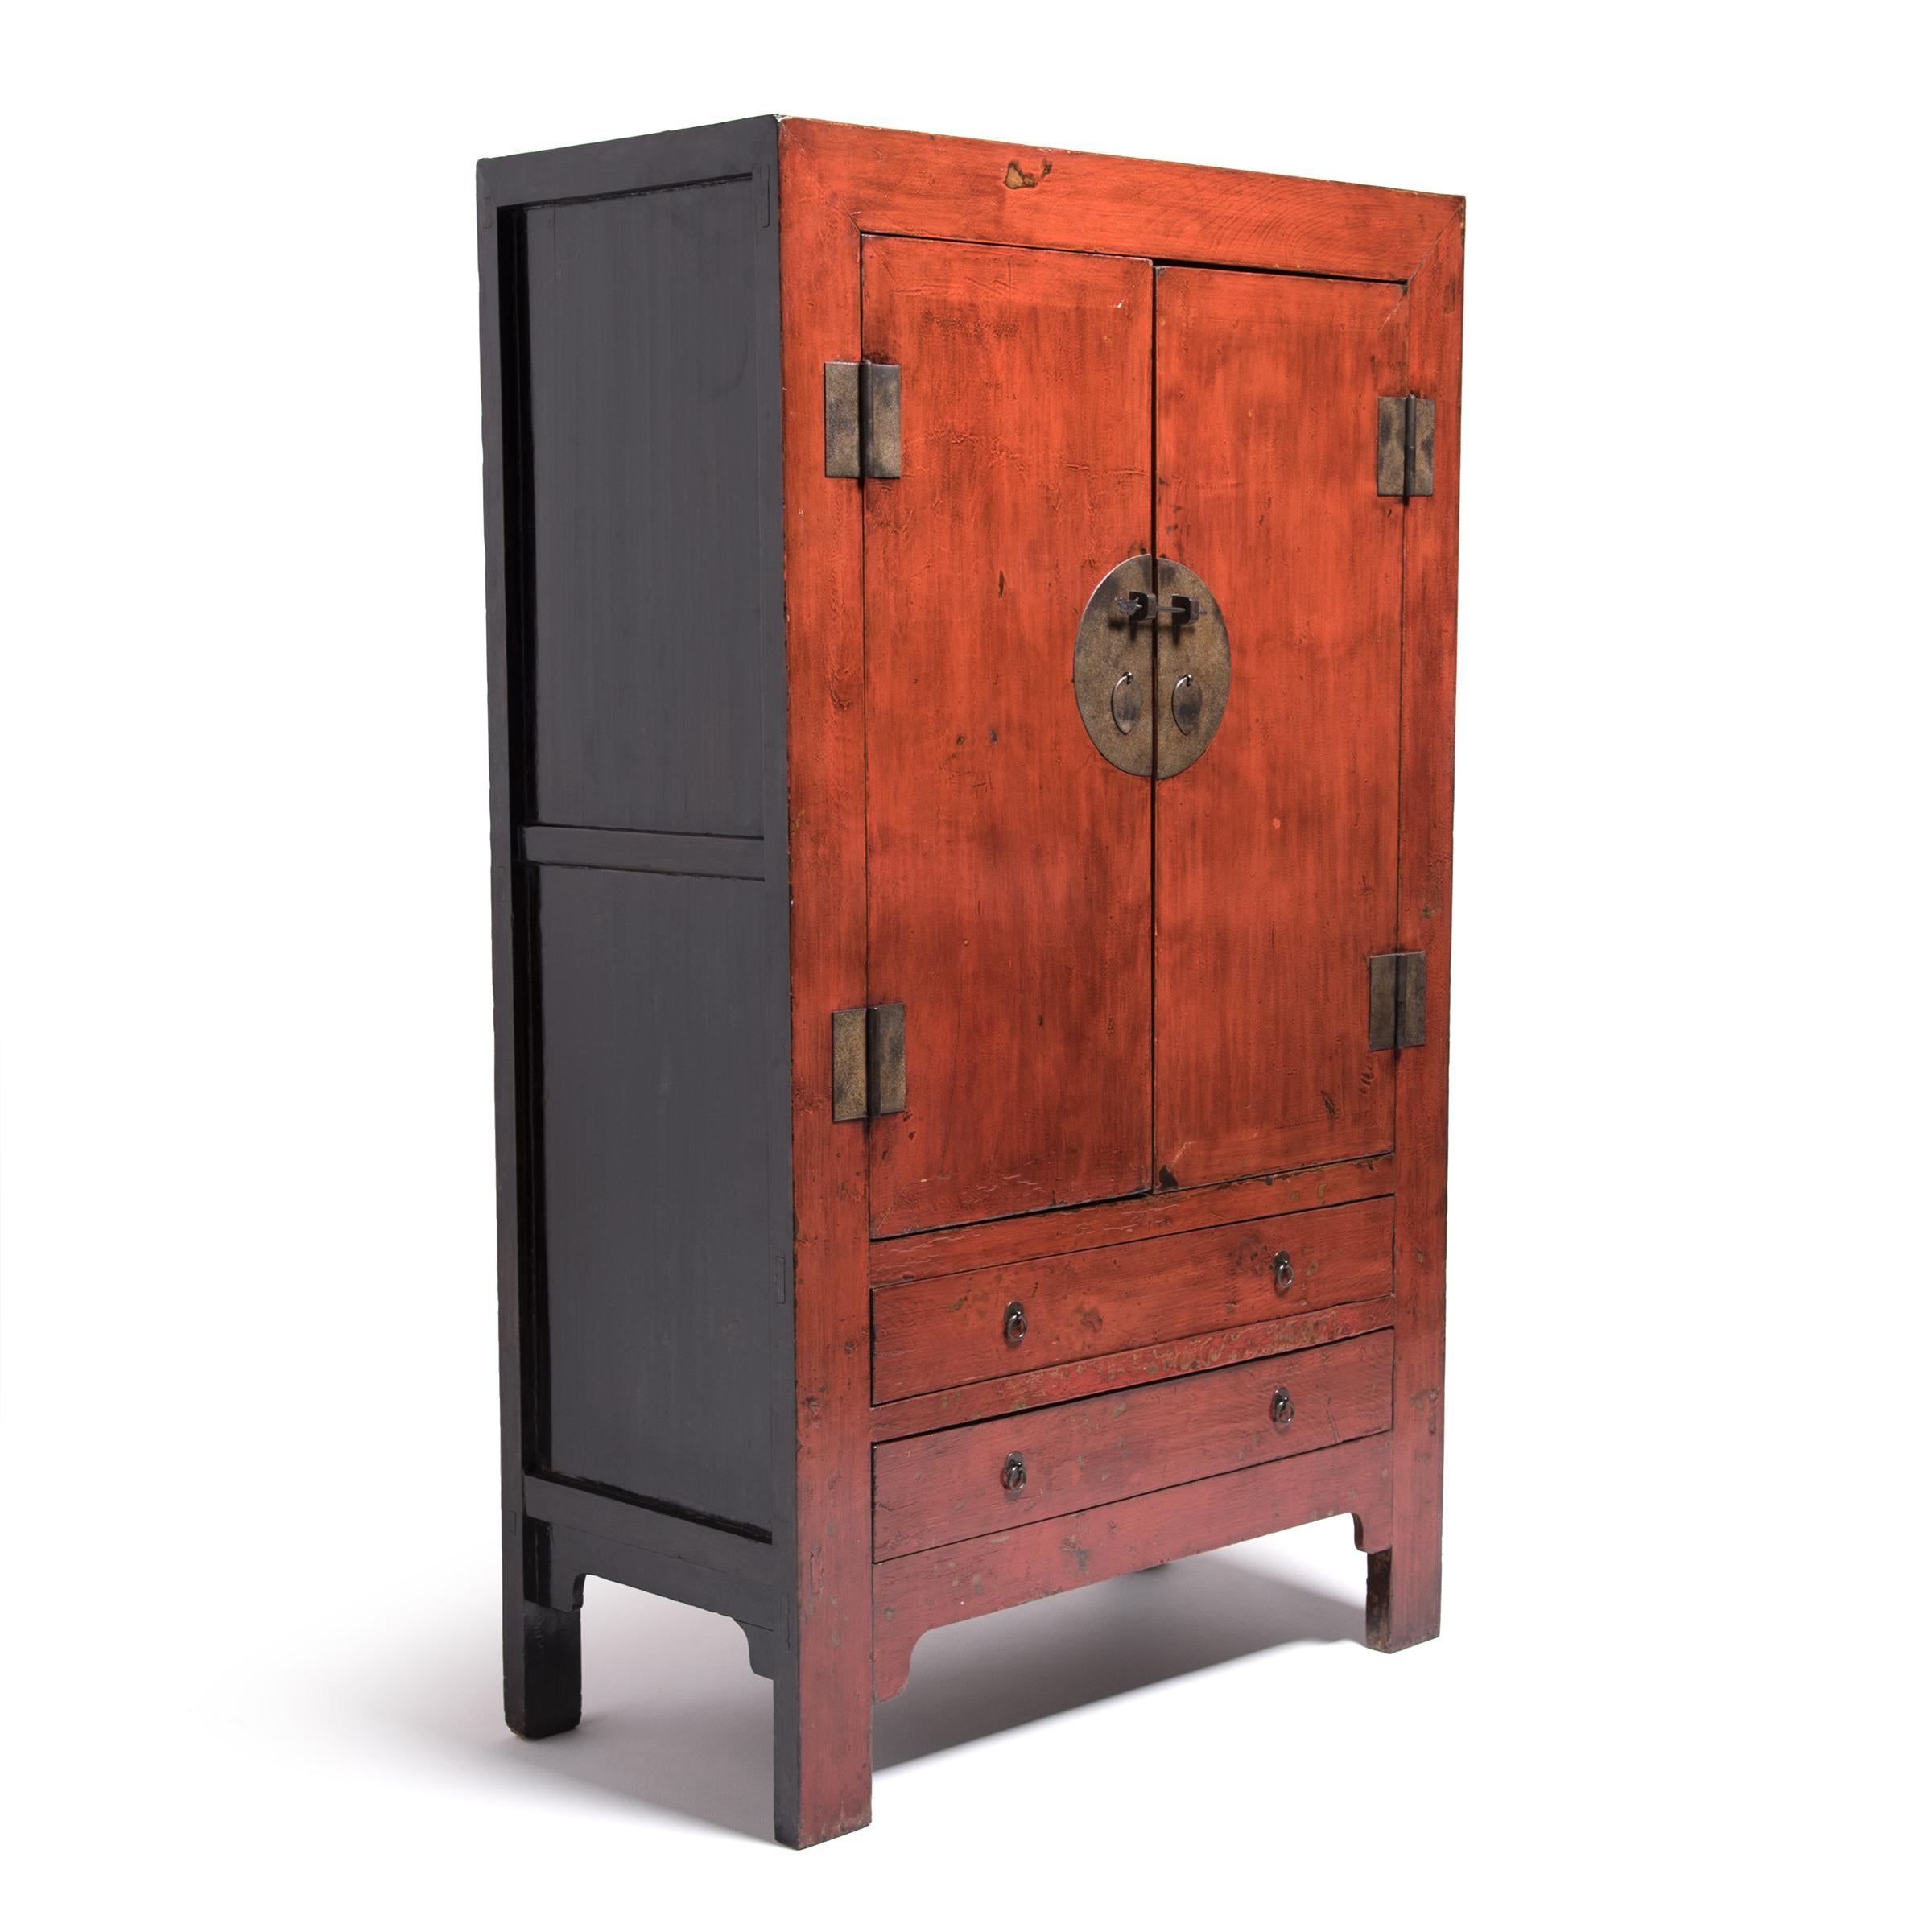 19th Century Chinese Tall Lacquered Dowry Cabinet